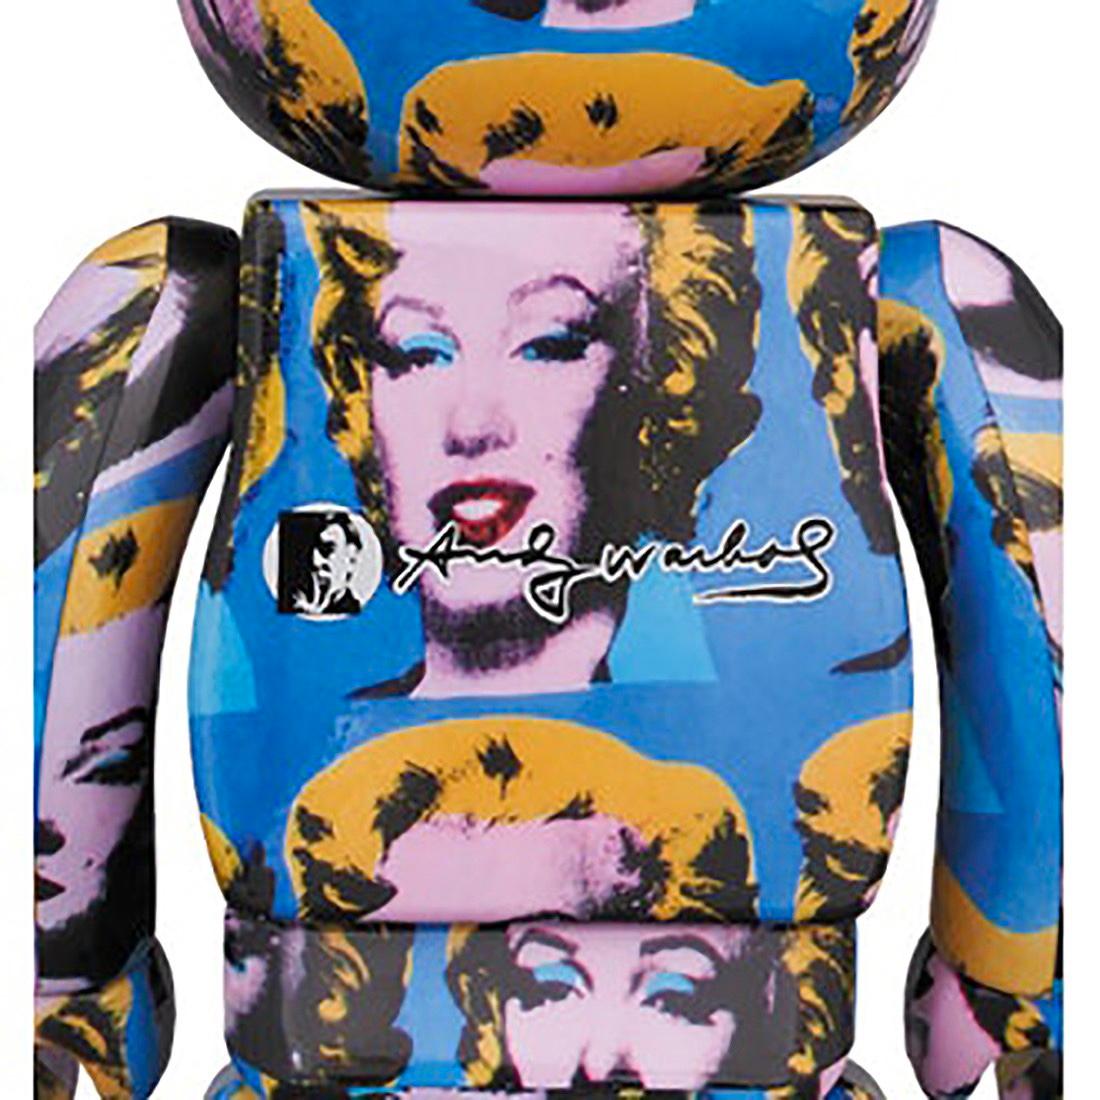 Andy Warhol Marilyn Bearbrick 1000% Companion (Warhol BE@RBRICK 1000%) - Sculpture by (after) Andy Warhol